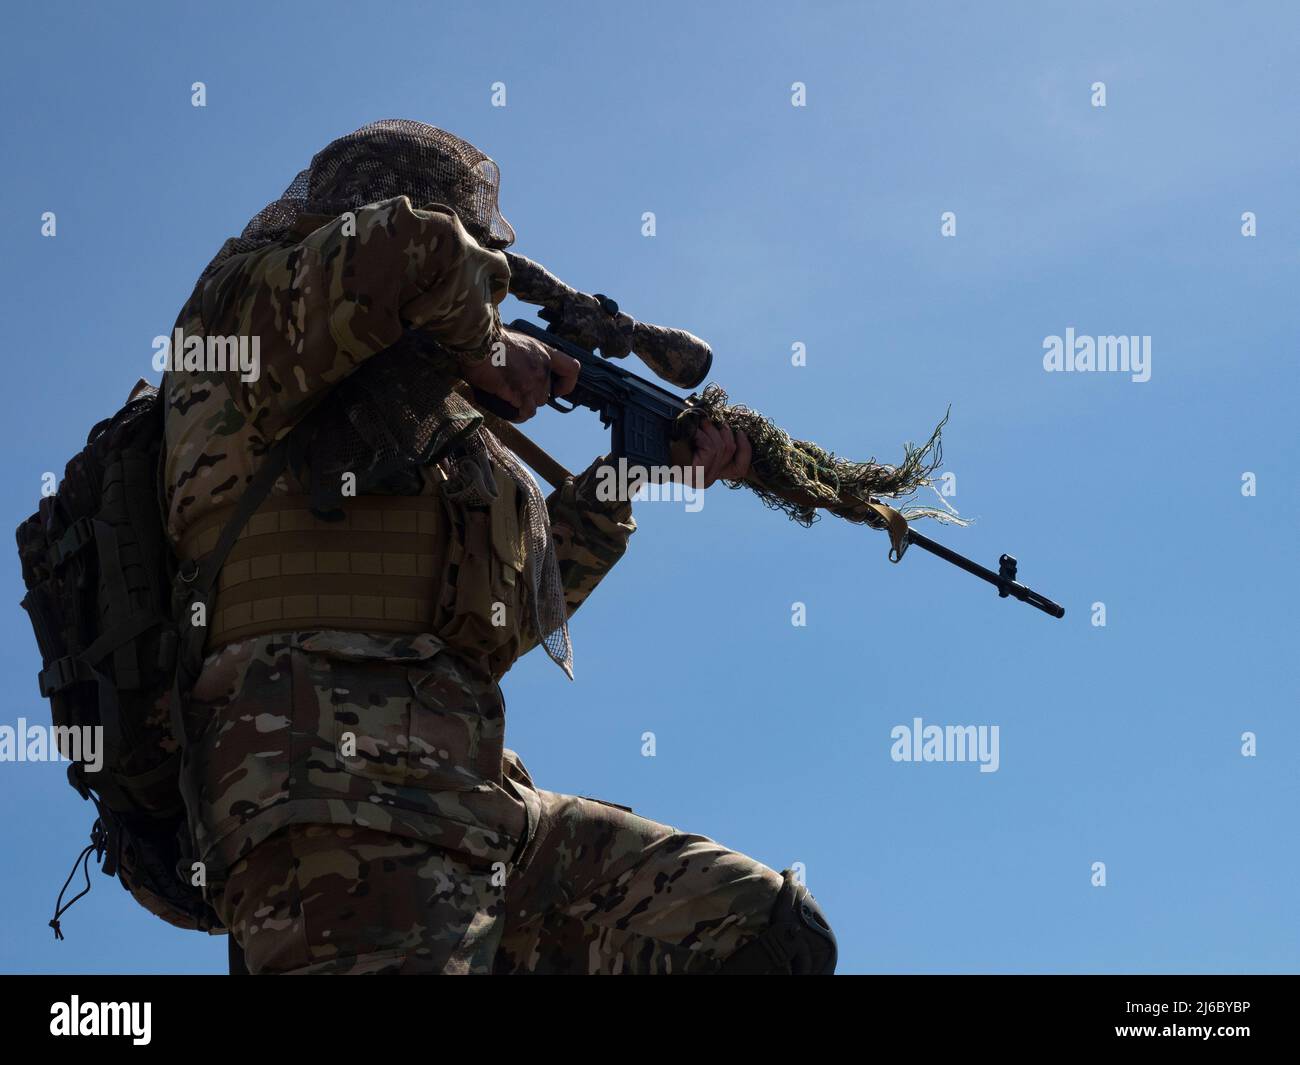 A professional special forces sniper aims at the enemy against the blue sky. Concept of modern military operations and a special operation on enemy te Stock Photo